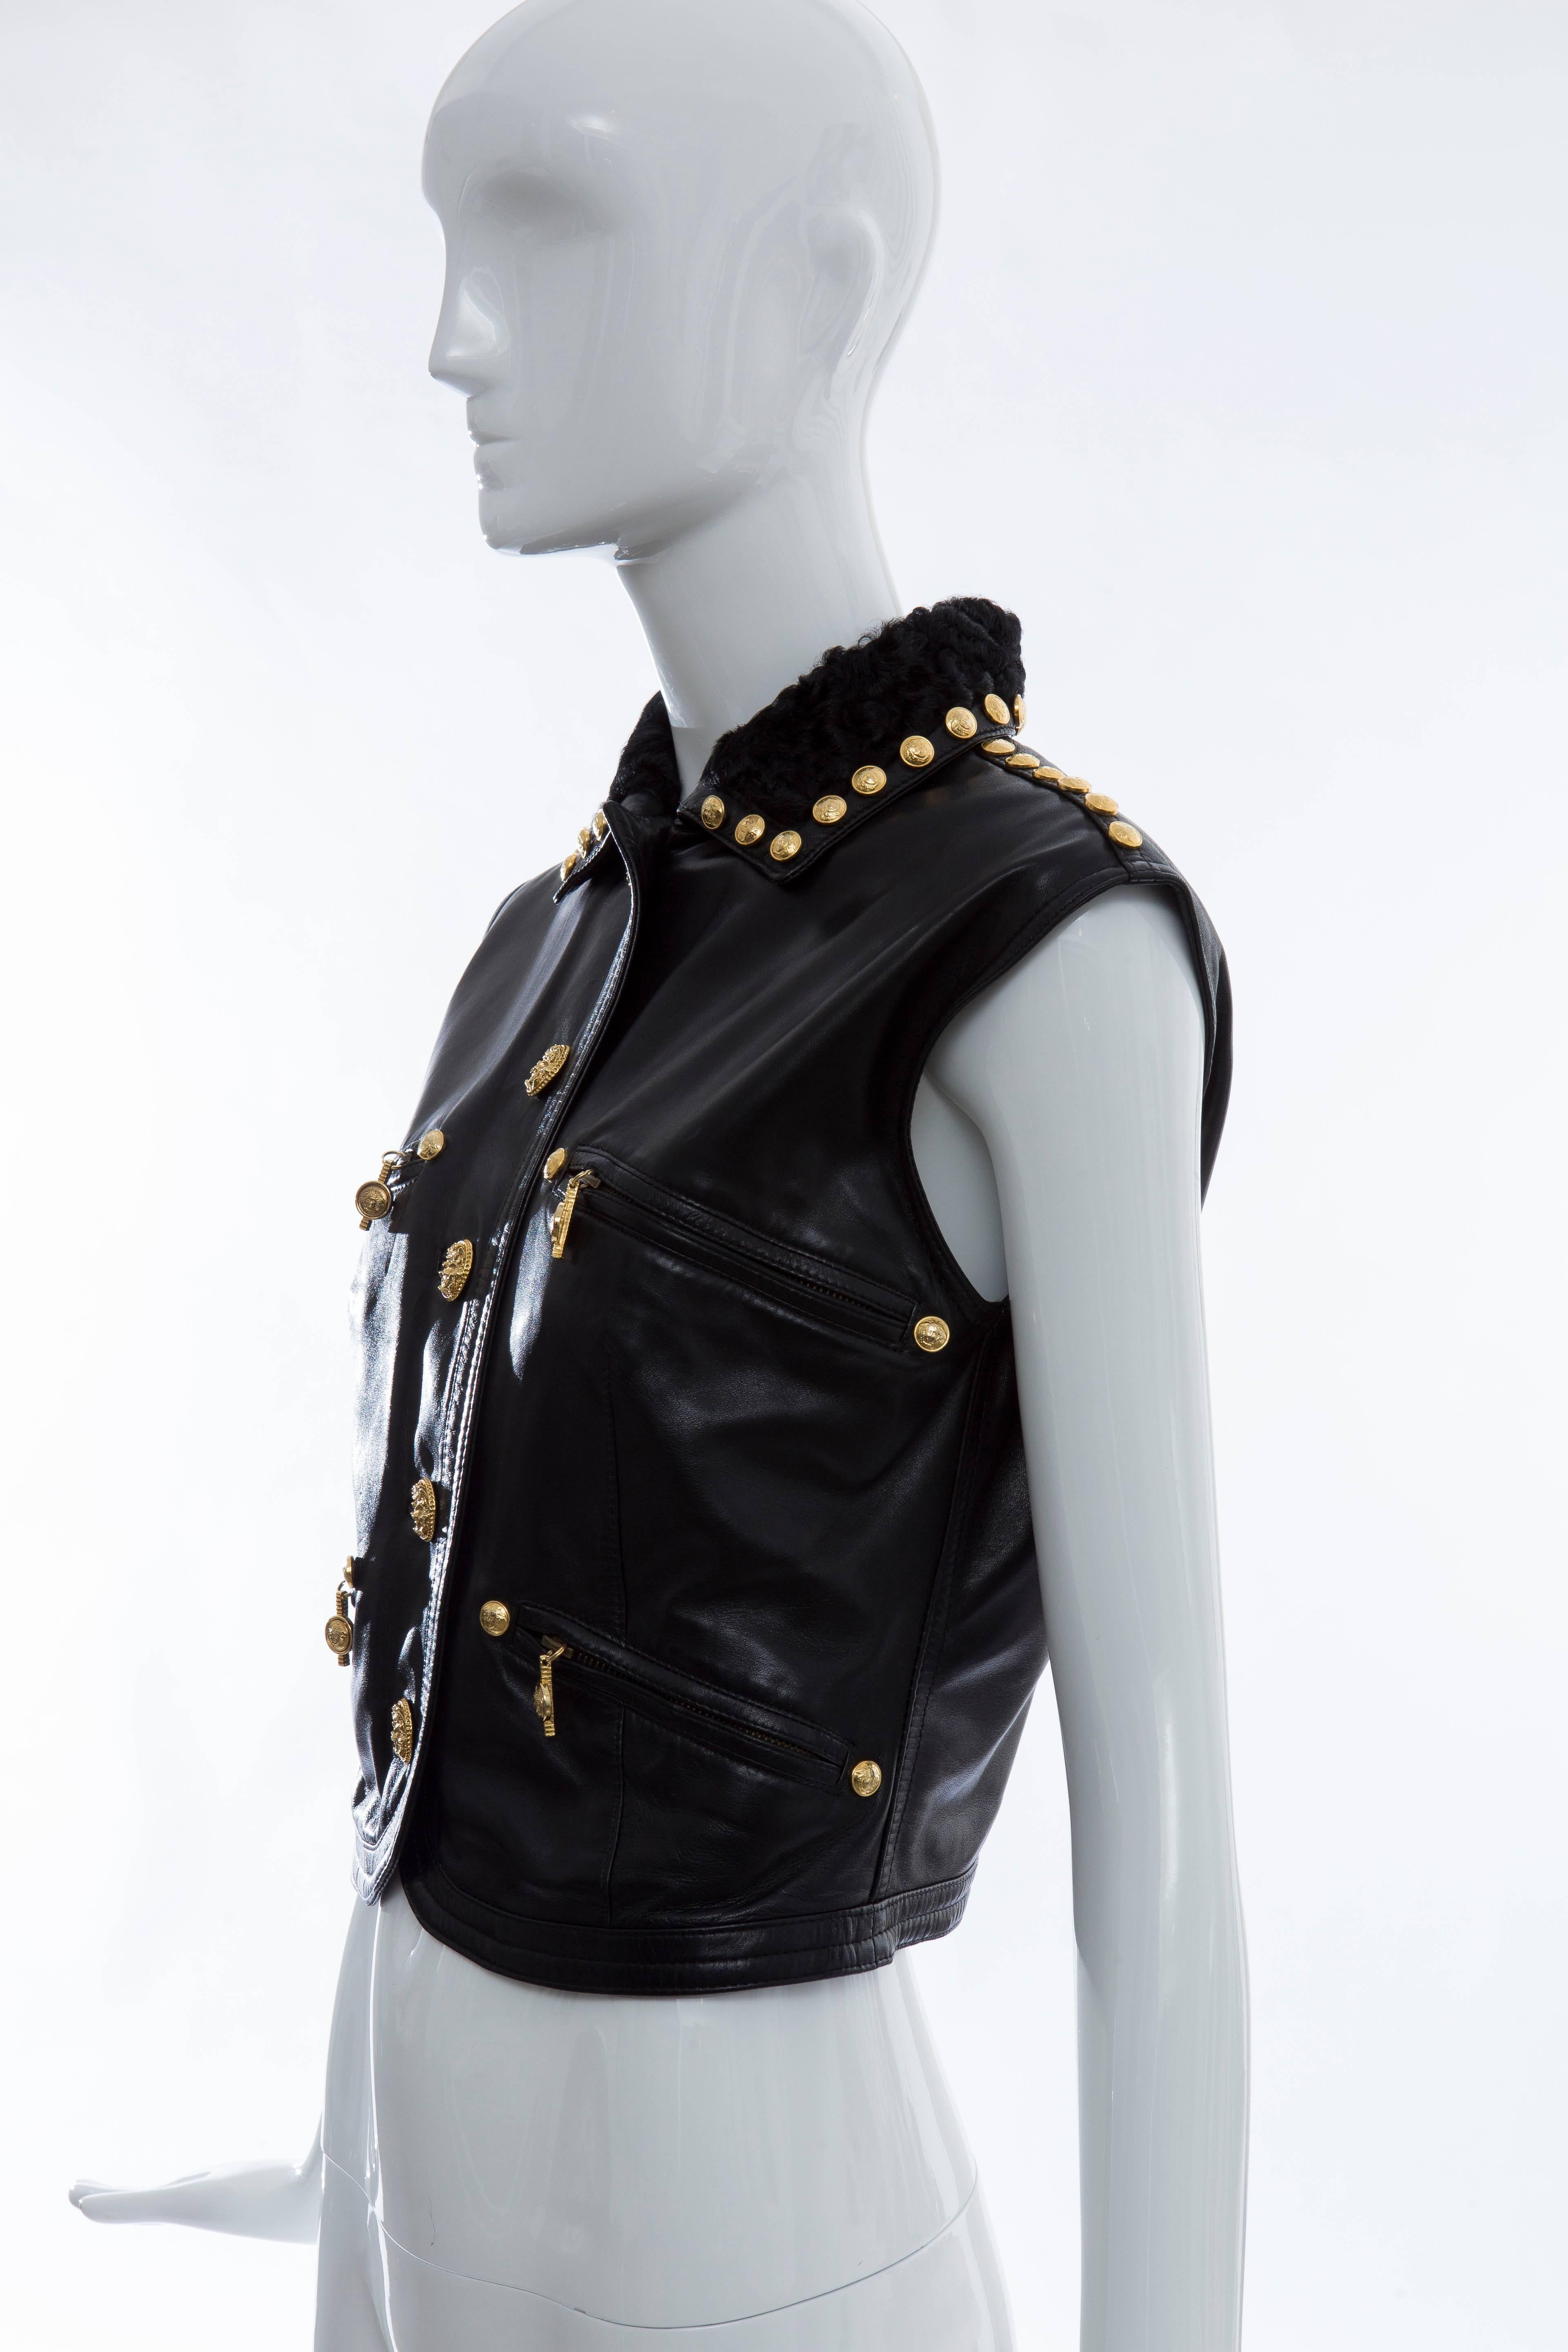 Gianni Versace Black Studded Leather Vest With Persian Lamb Collar, Circa 1990's 5